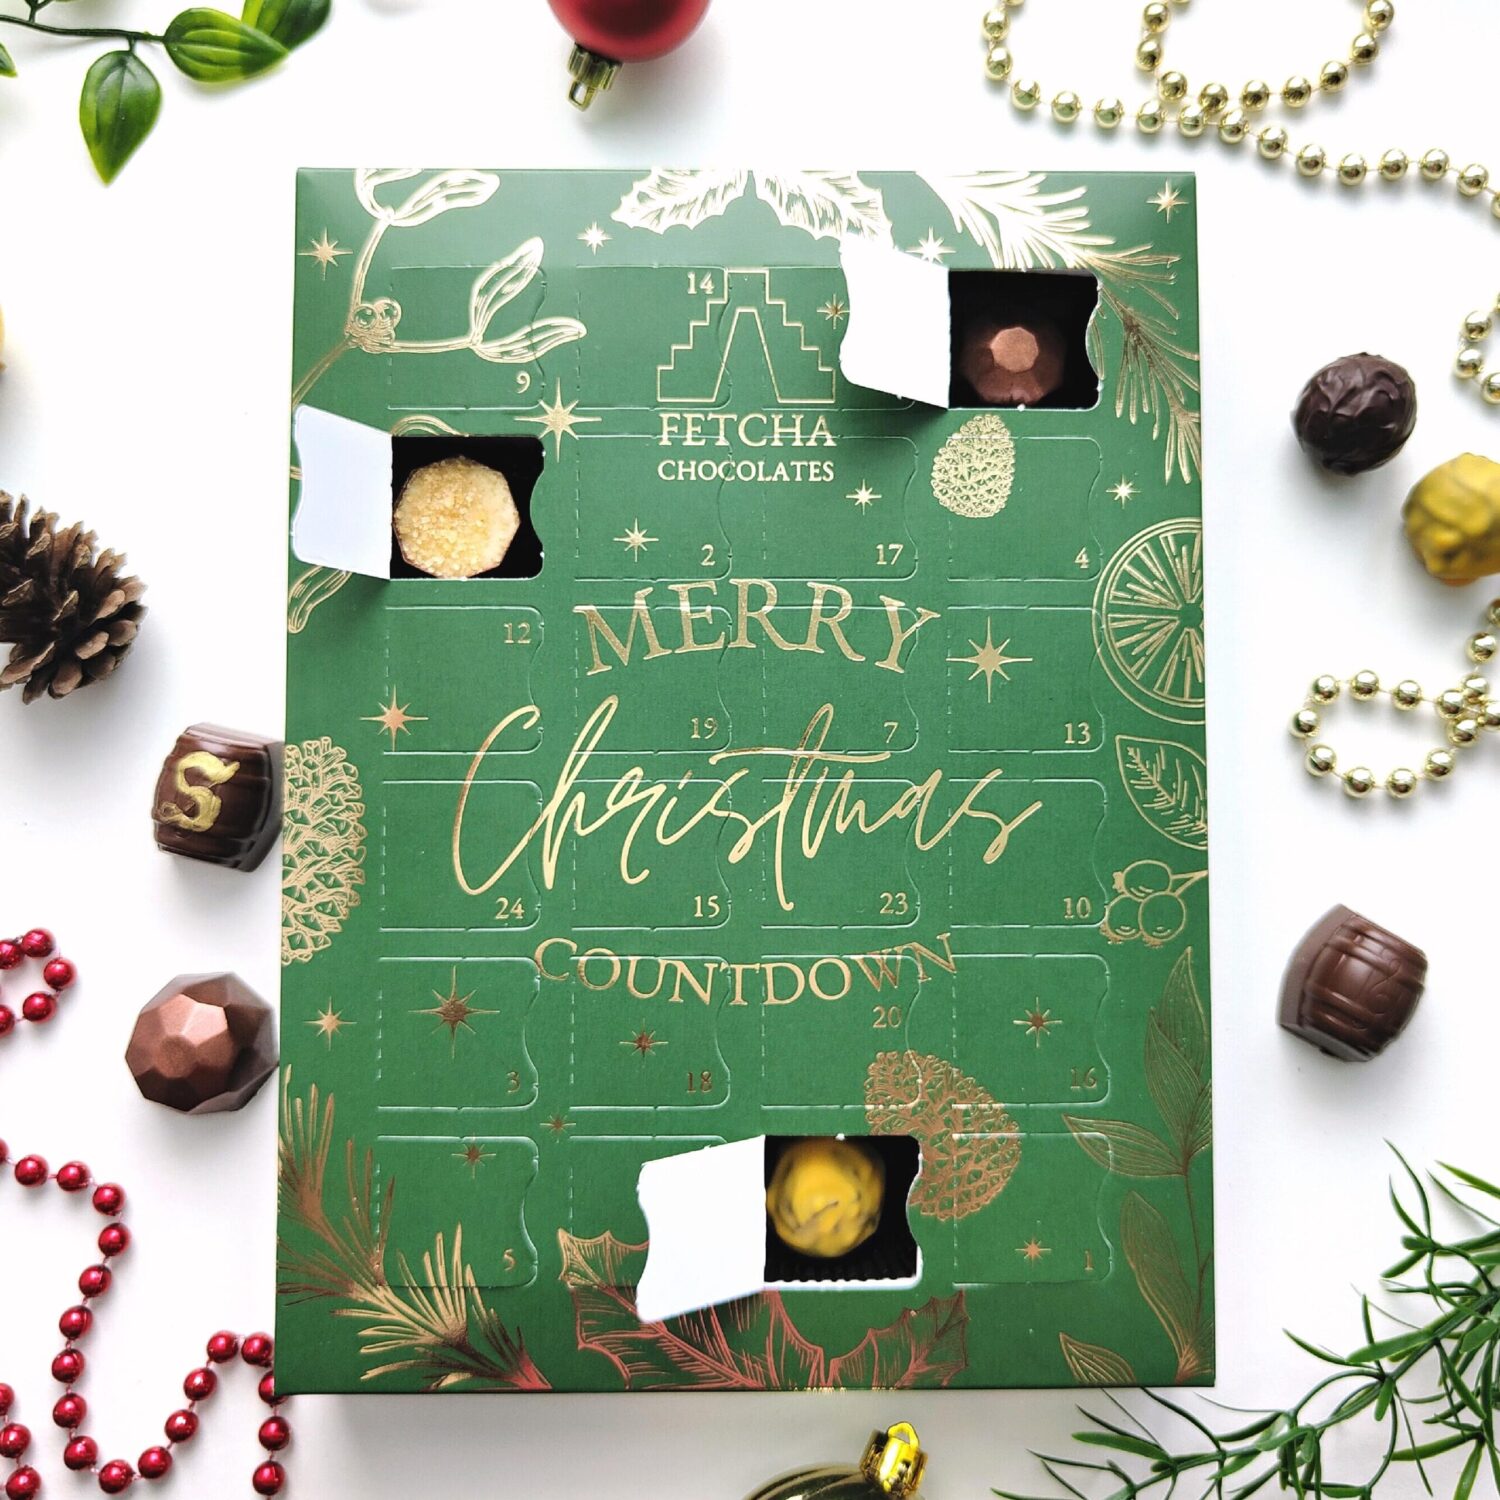 Fetcha Chocolates customised stock 24 Day Portrait Standard Advent Calendar. Green print with metallic gold foil detailing. Snowflakes, holly, berries and greenery illustrations. Filled with Alcoholic chocolate truffles